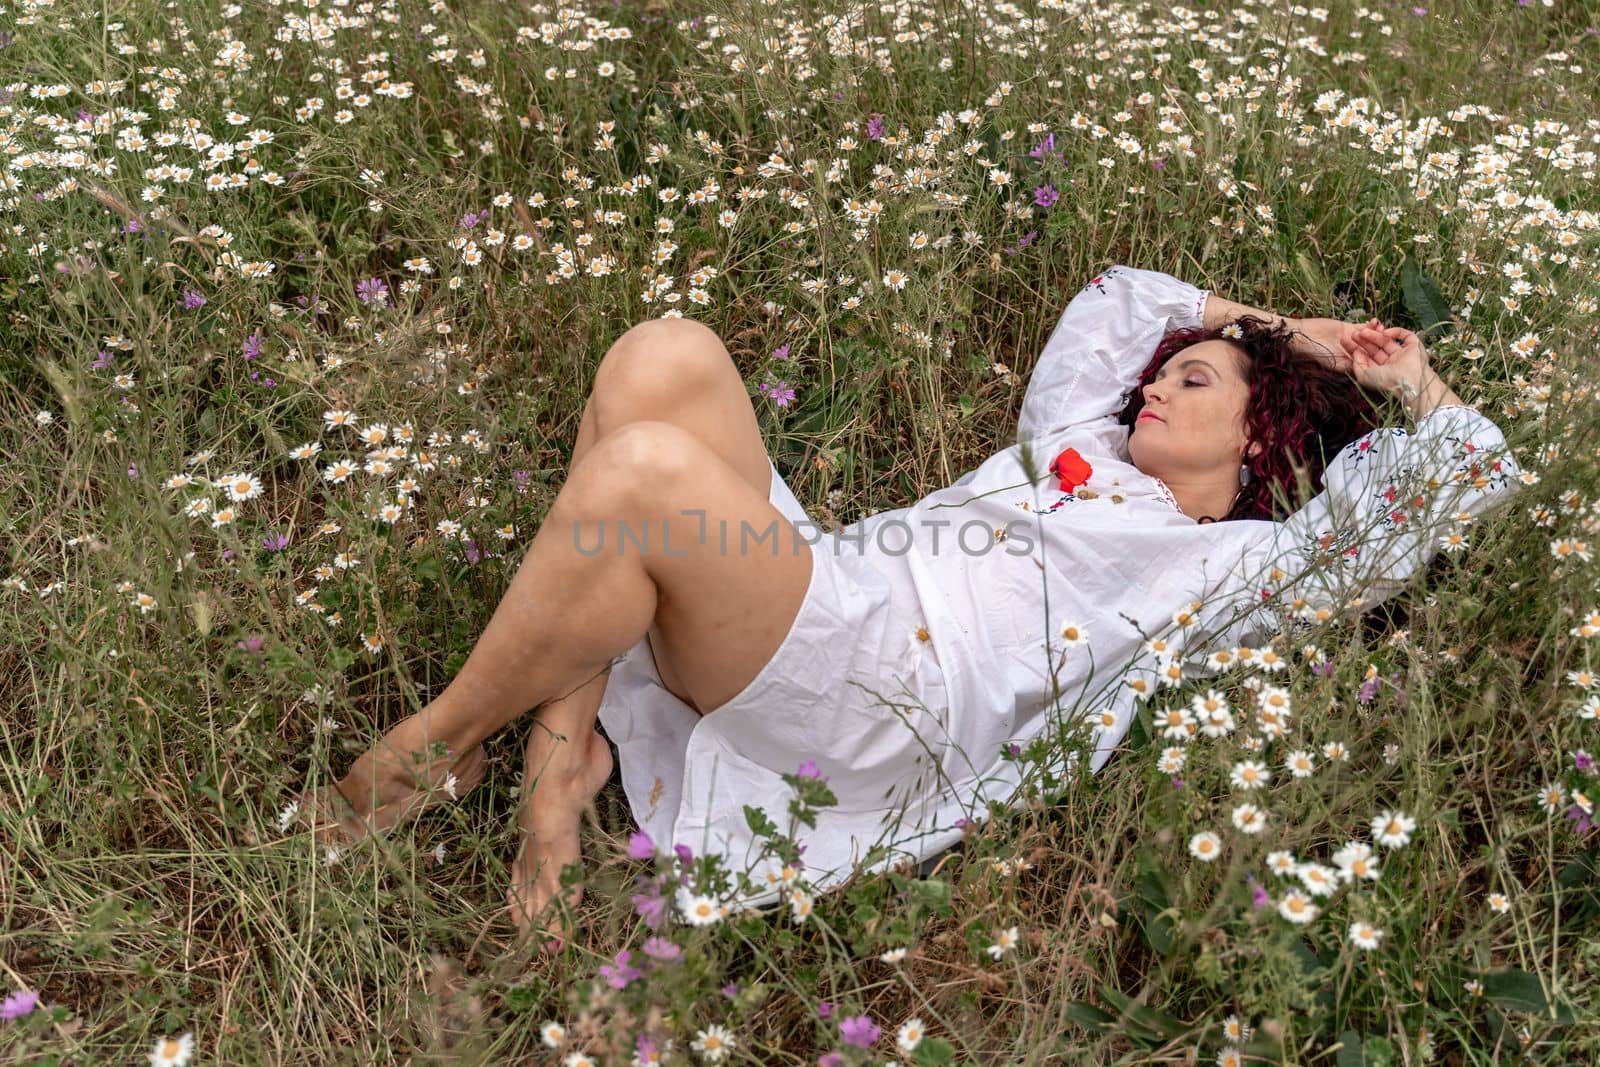 A beautiful woman lies on her back in a field and lifts up her beautiful legs. Good morning.